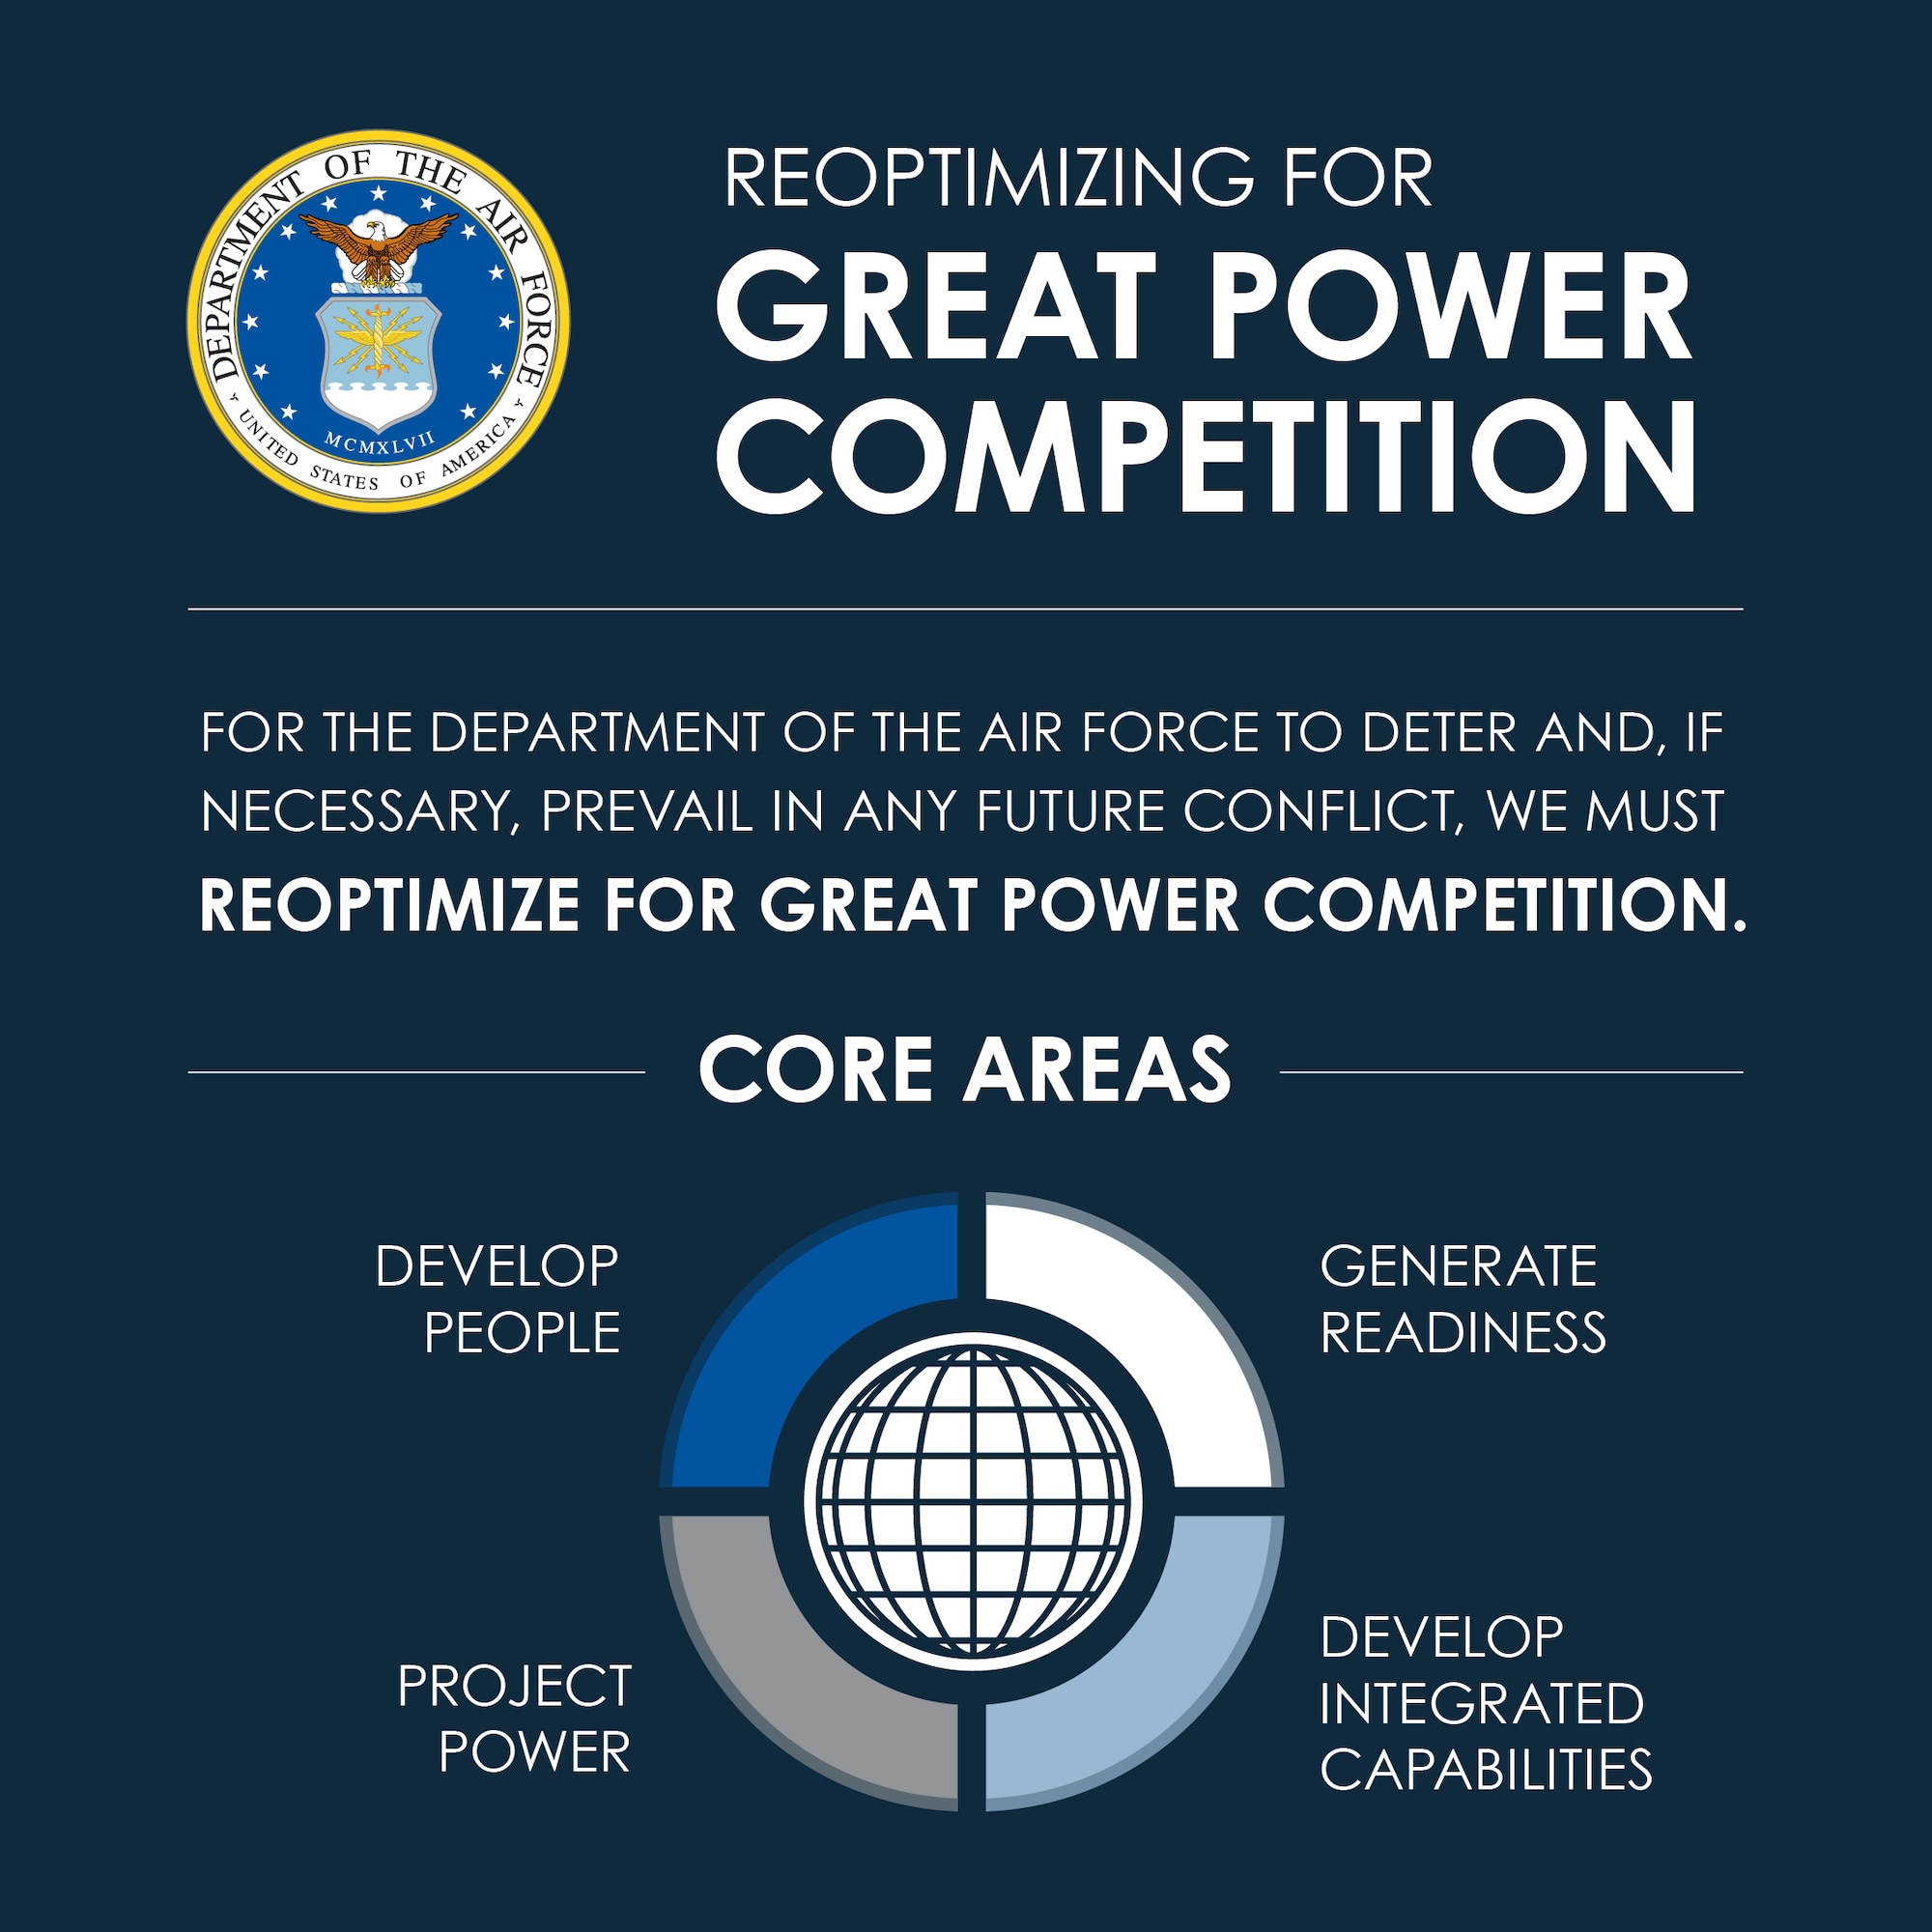 The Department of the Air Force’s senior civilian and military leaders, Feb. 12, unveiled sweeping plans for reshaping, refocusing, and reoptimizing the Air Force and Space Force to ensure continued supremacy in those domains while also better posturing the services to deter and, if necessary, prevail in an era of Great Power Competition. (Department of the Air Force graphic)